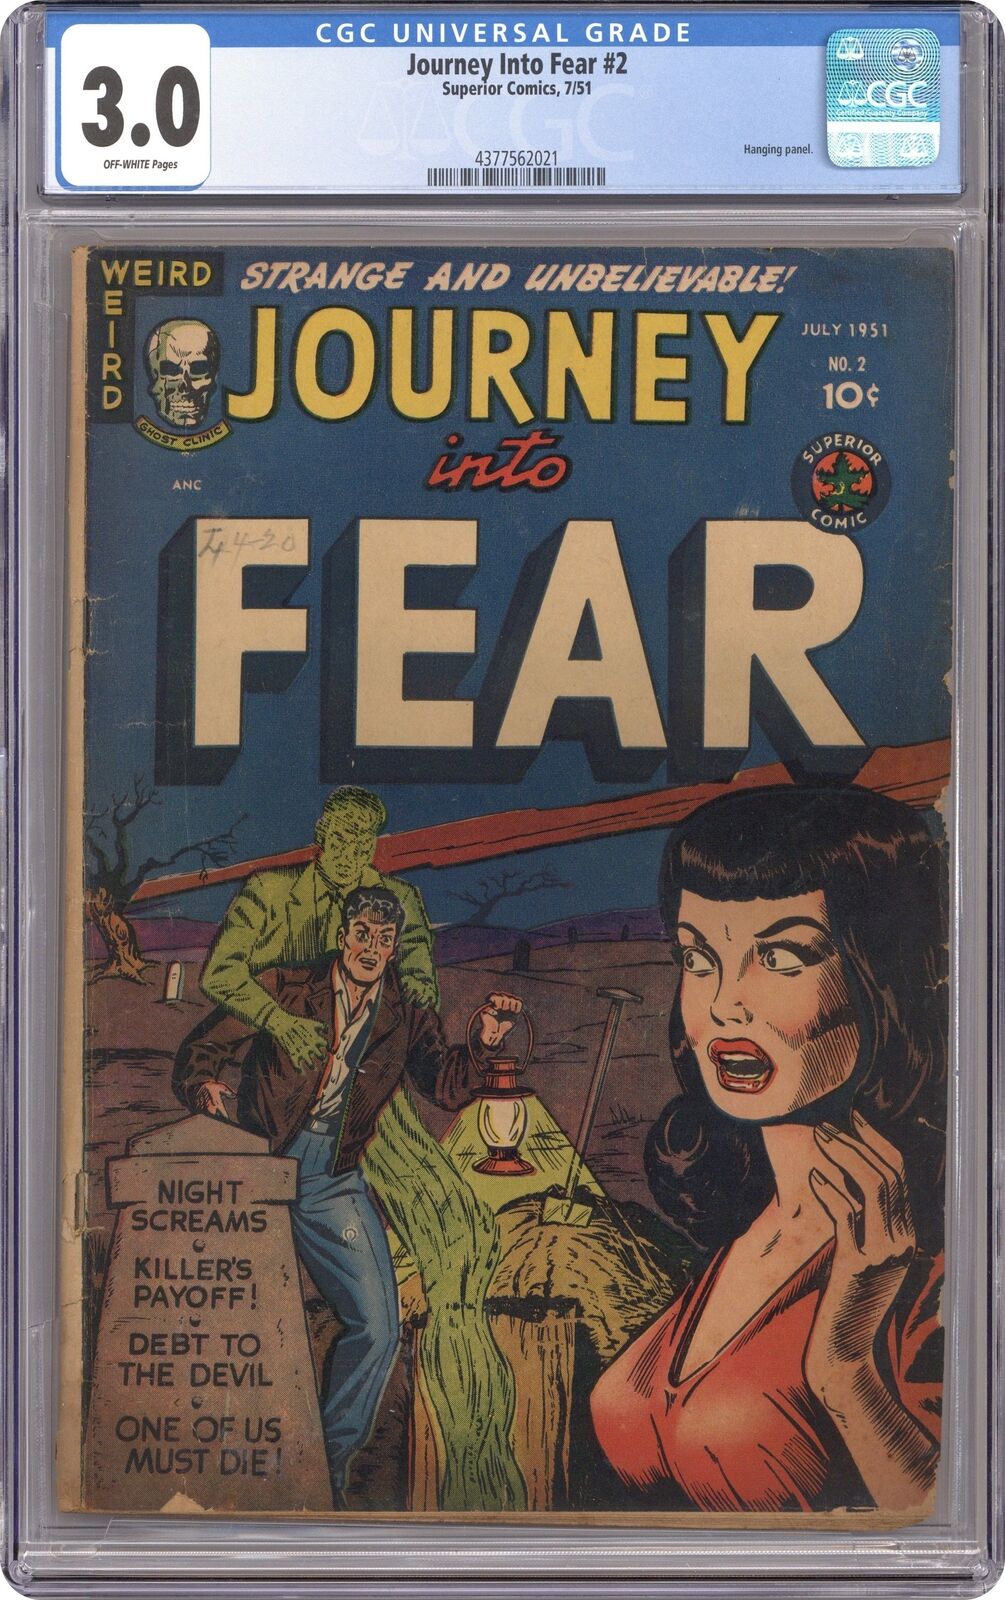 Journey into Fear #2 CGC 3.0 1951 4377562021